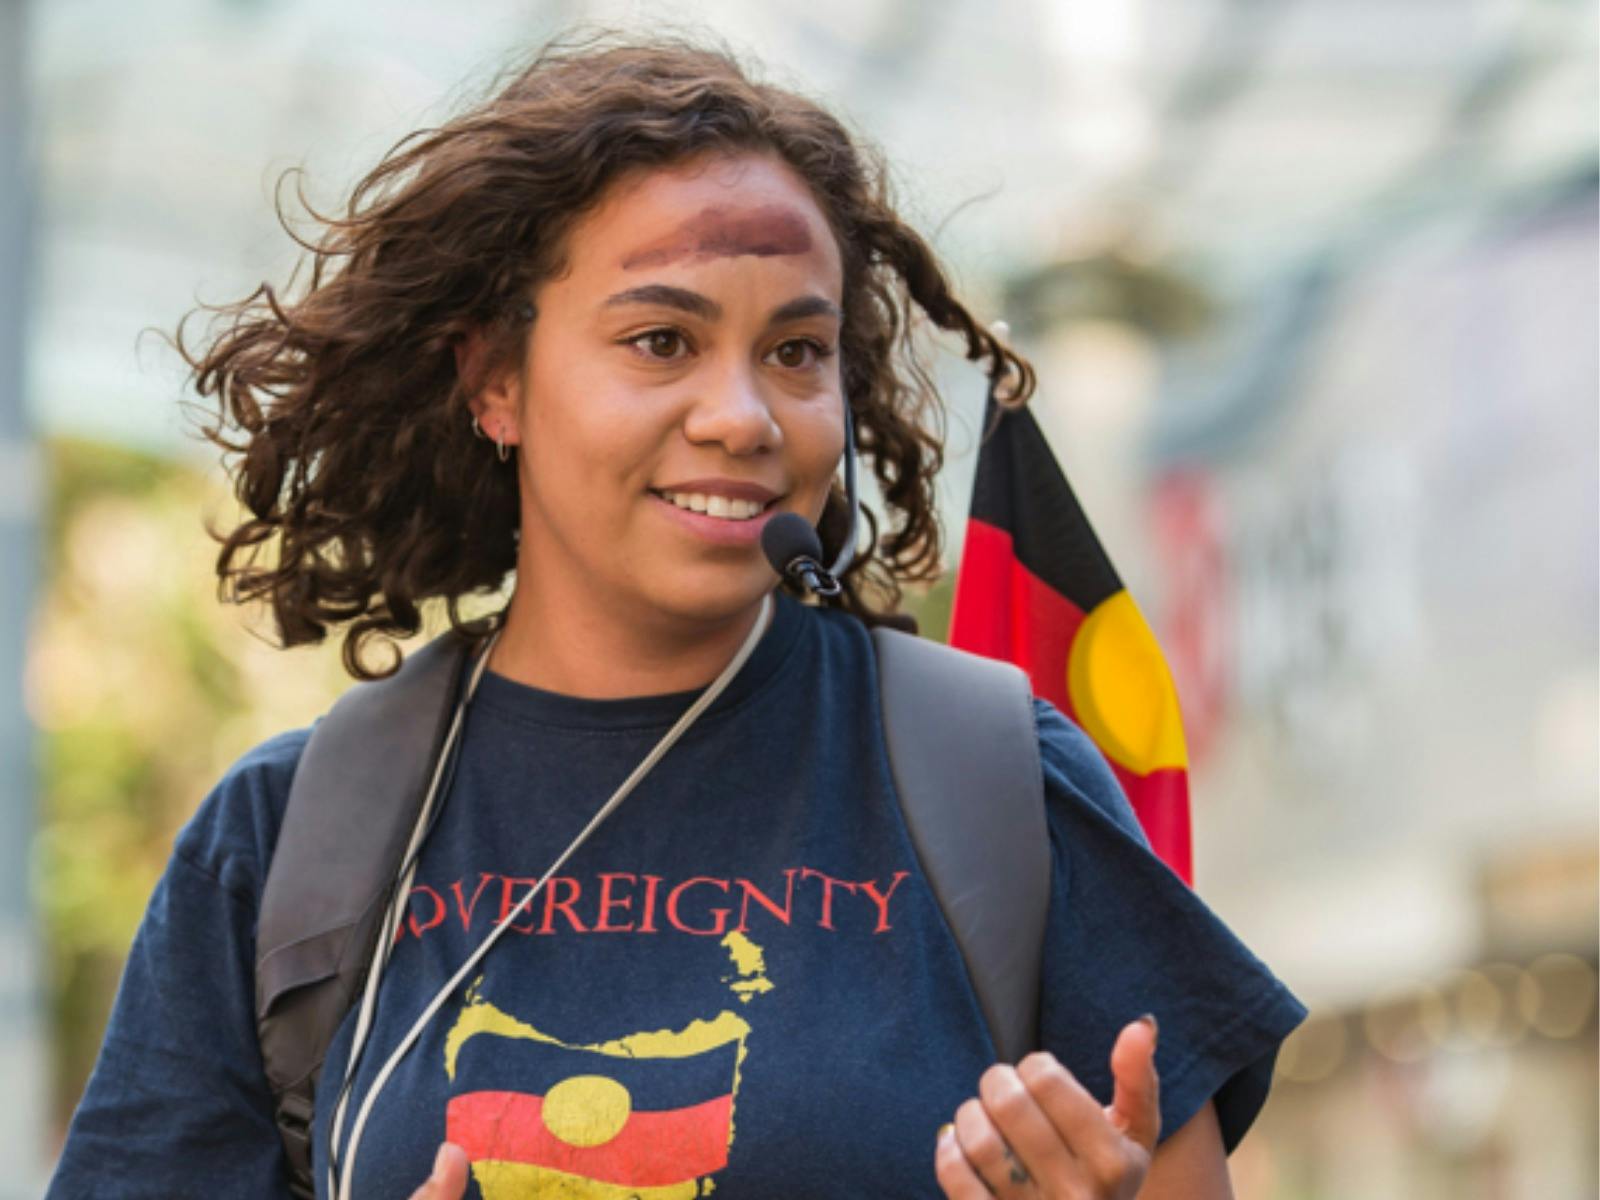 Woman named Nunami stands wearing black T-shirt with text "sovereignty" & map of Tasmania